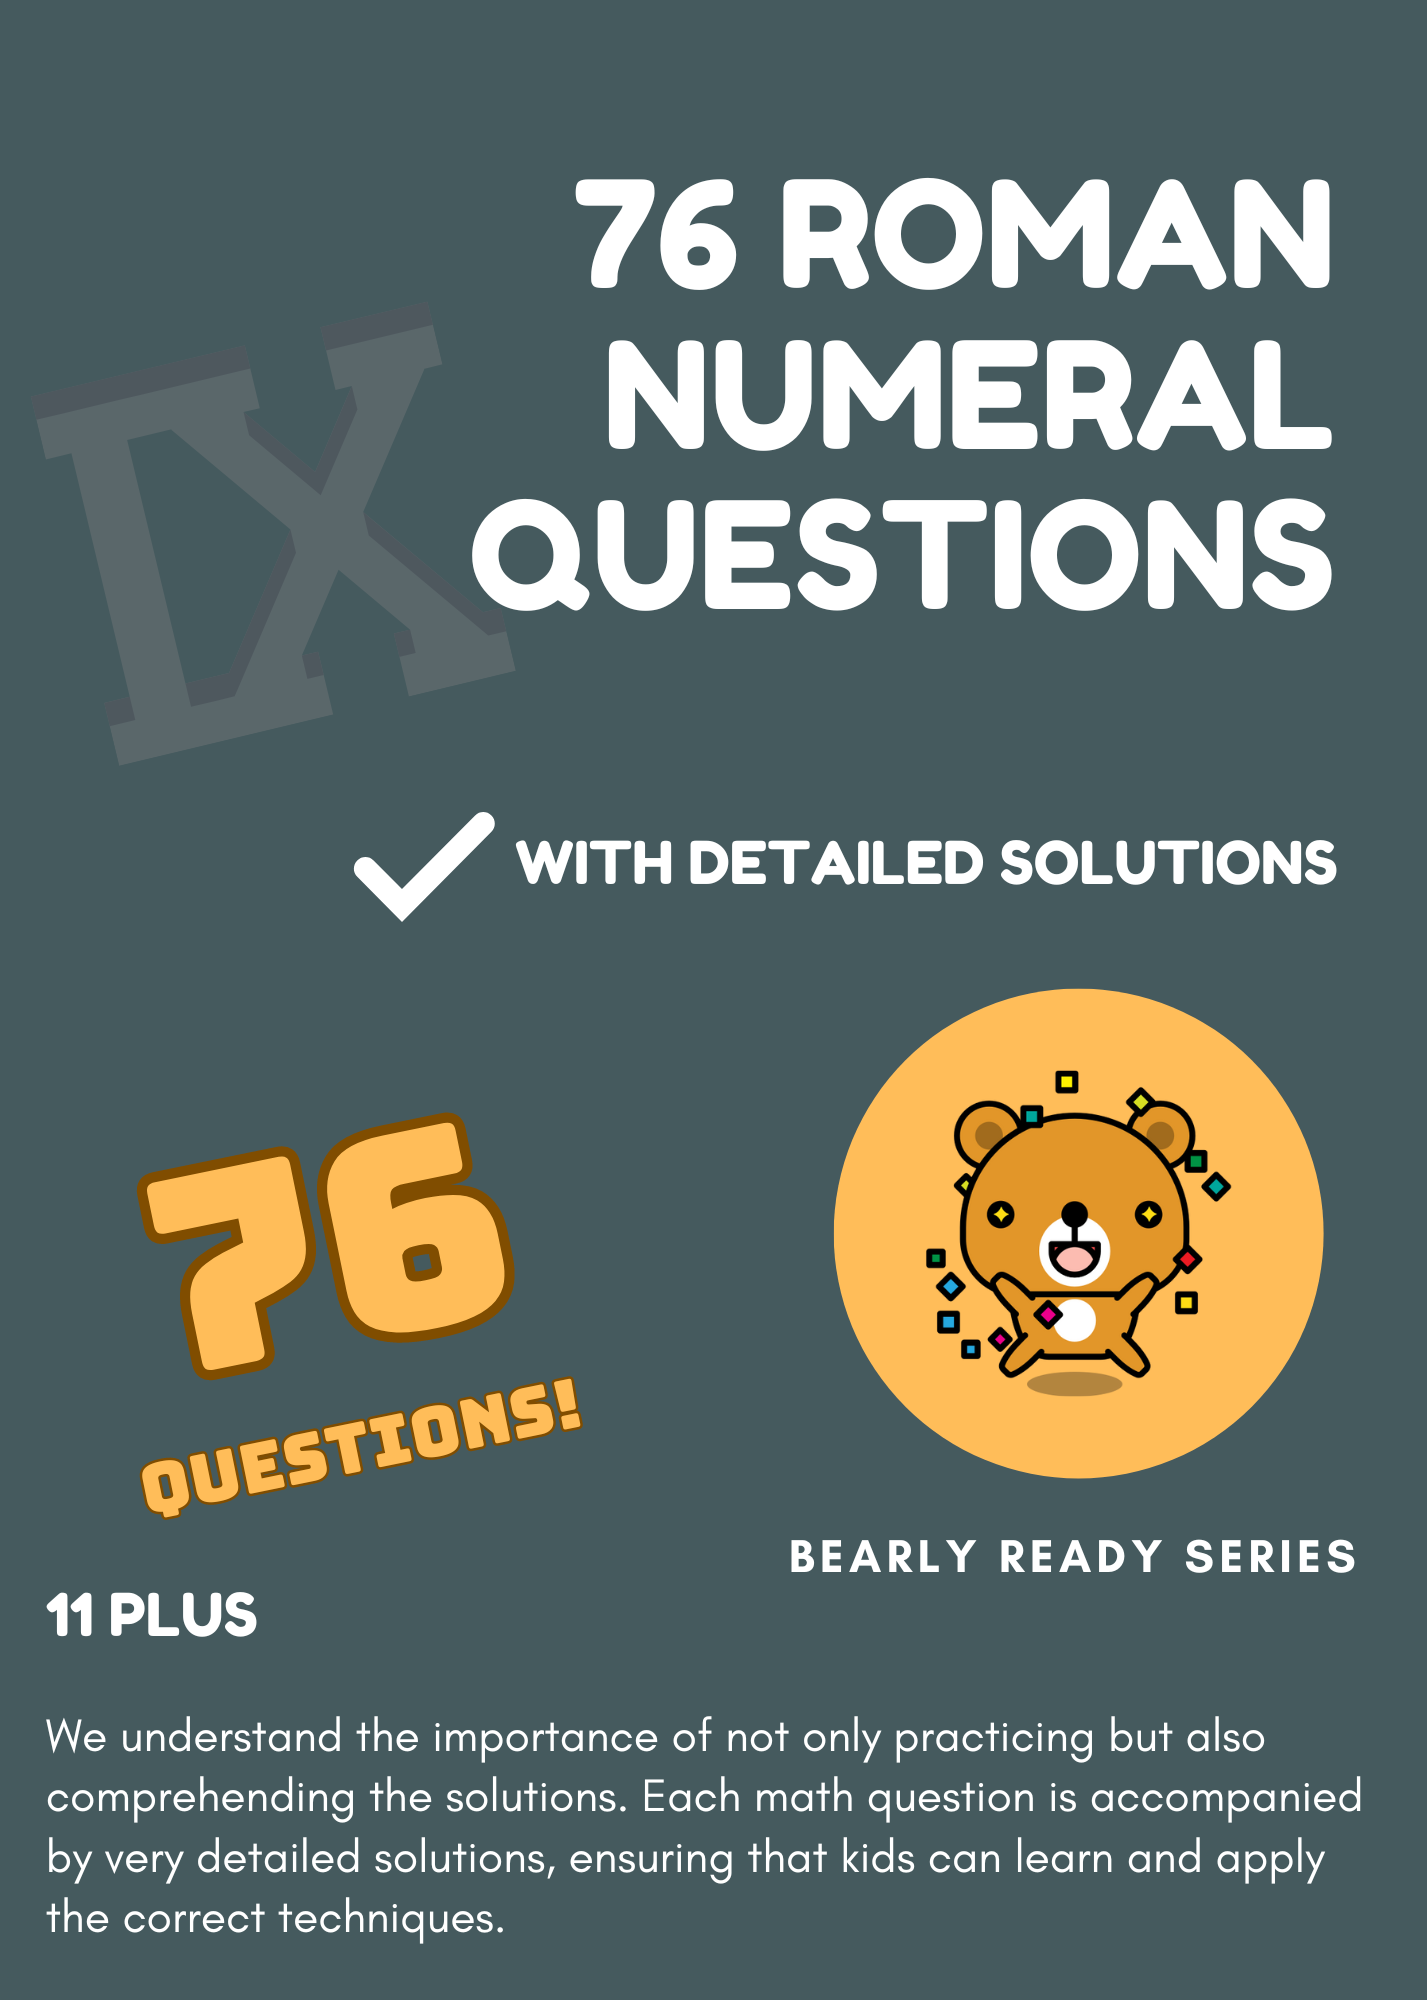 76 Roman Numeral questions with solutions for 11 plus exams. Ages 9, 10, 11